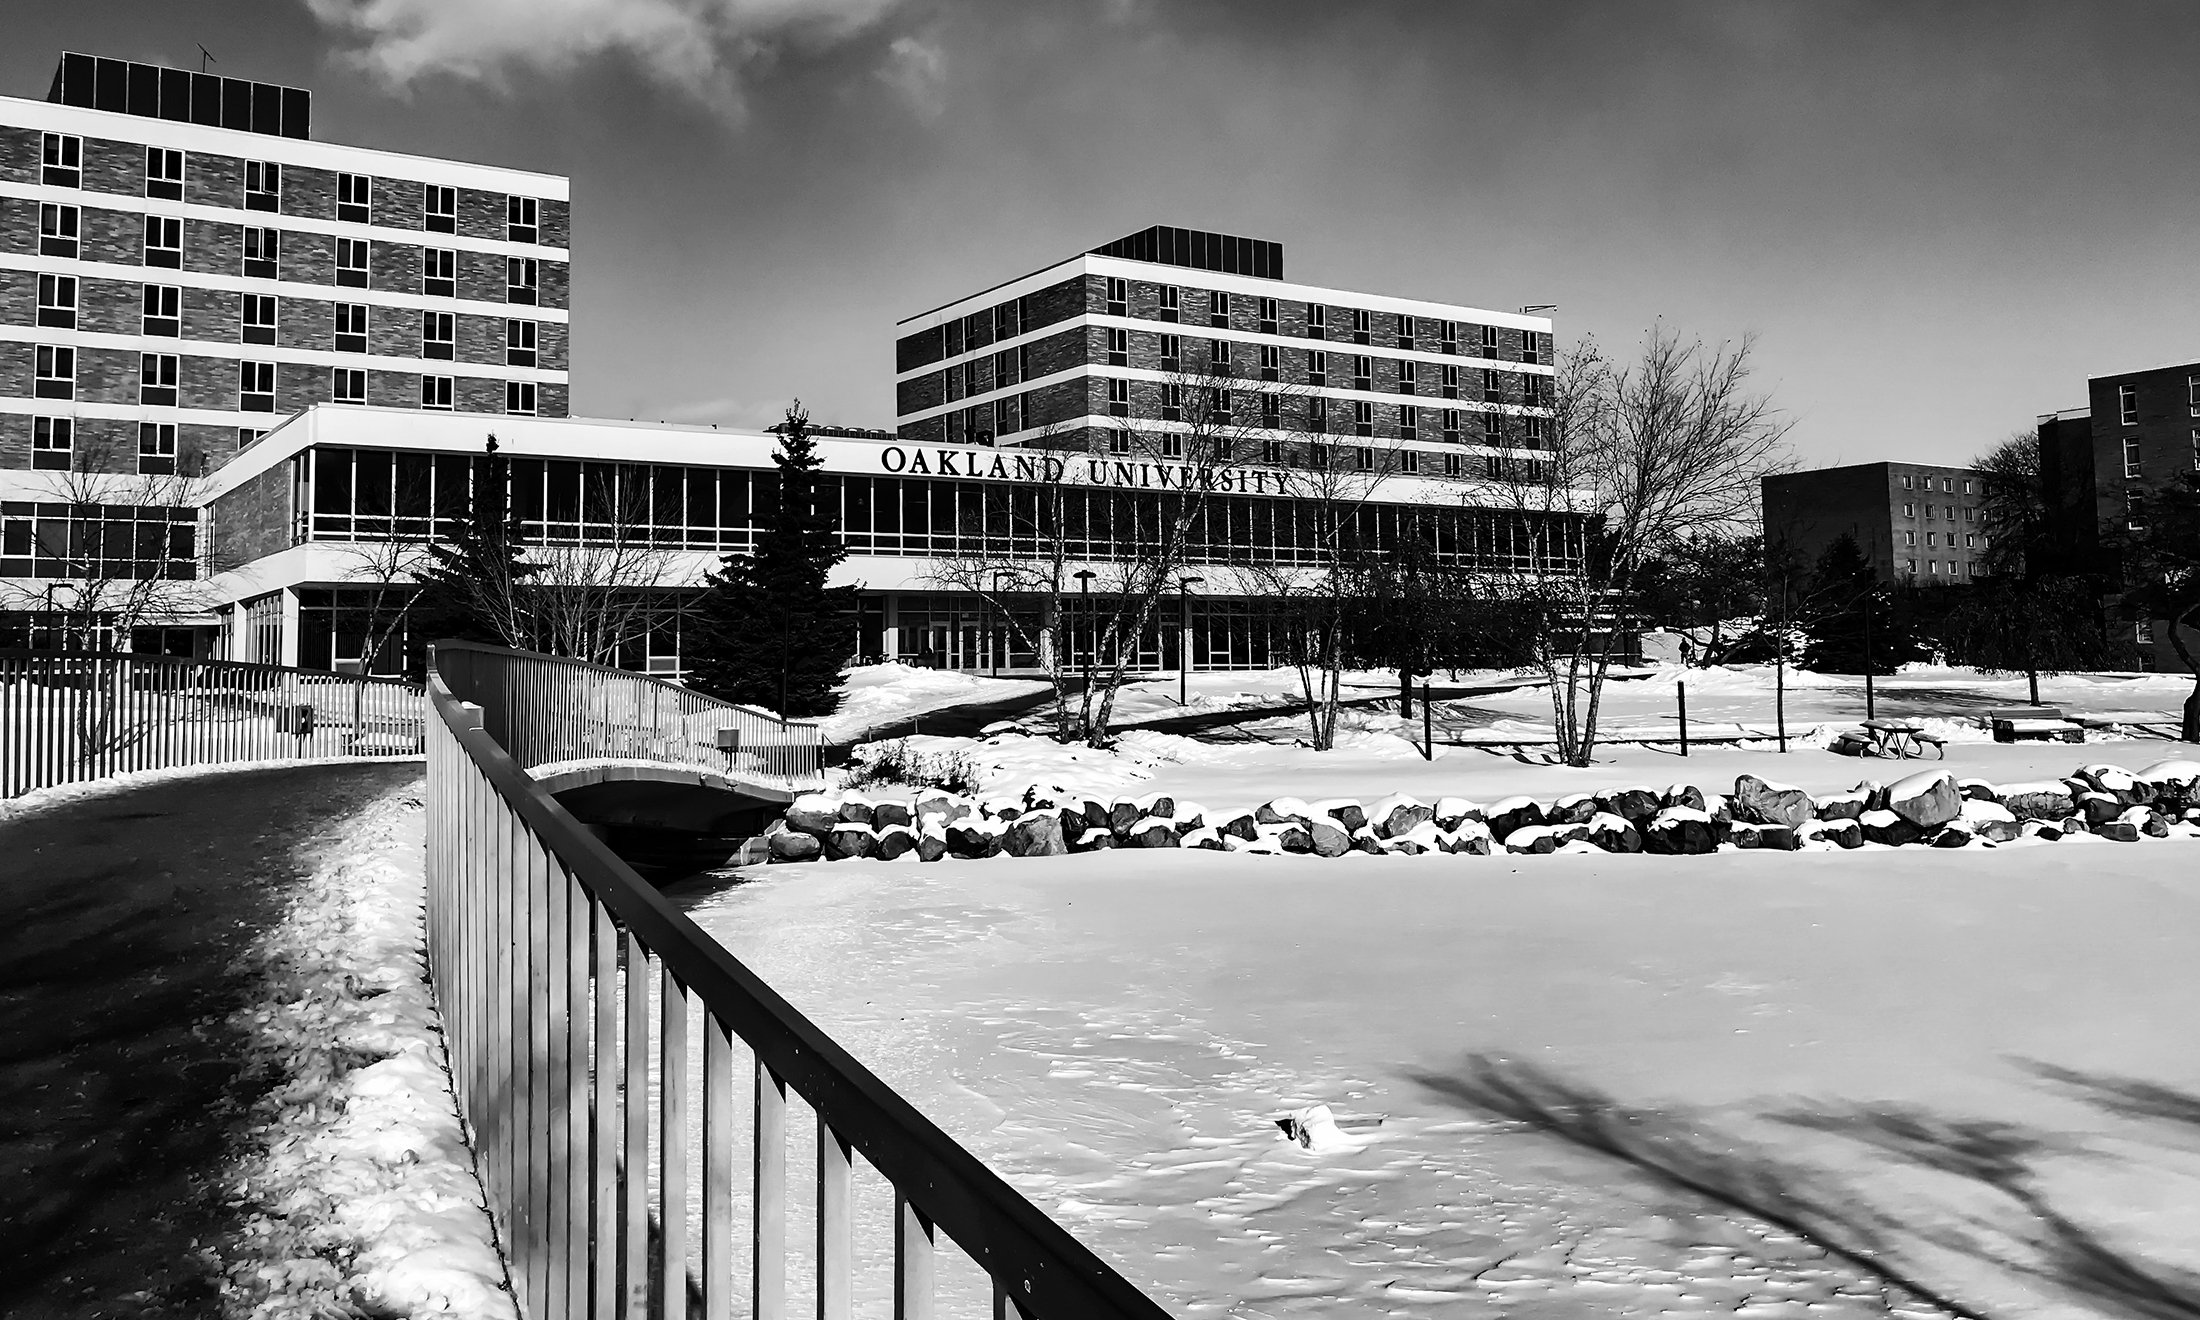 Black and white photo of Vandenberg Hall and bridge over bear lake in winter time. The lake is frozen and there is snow on the ground.